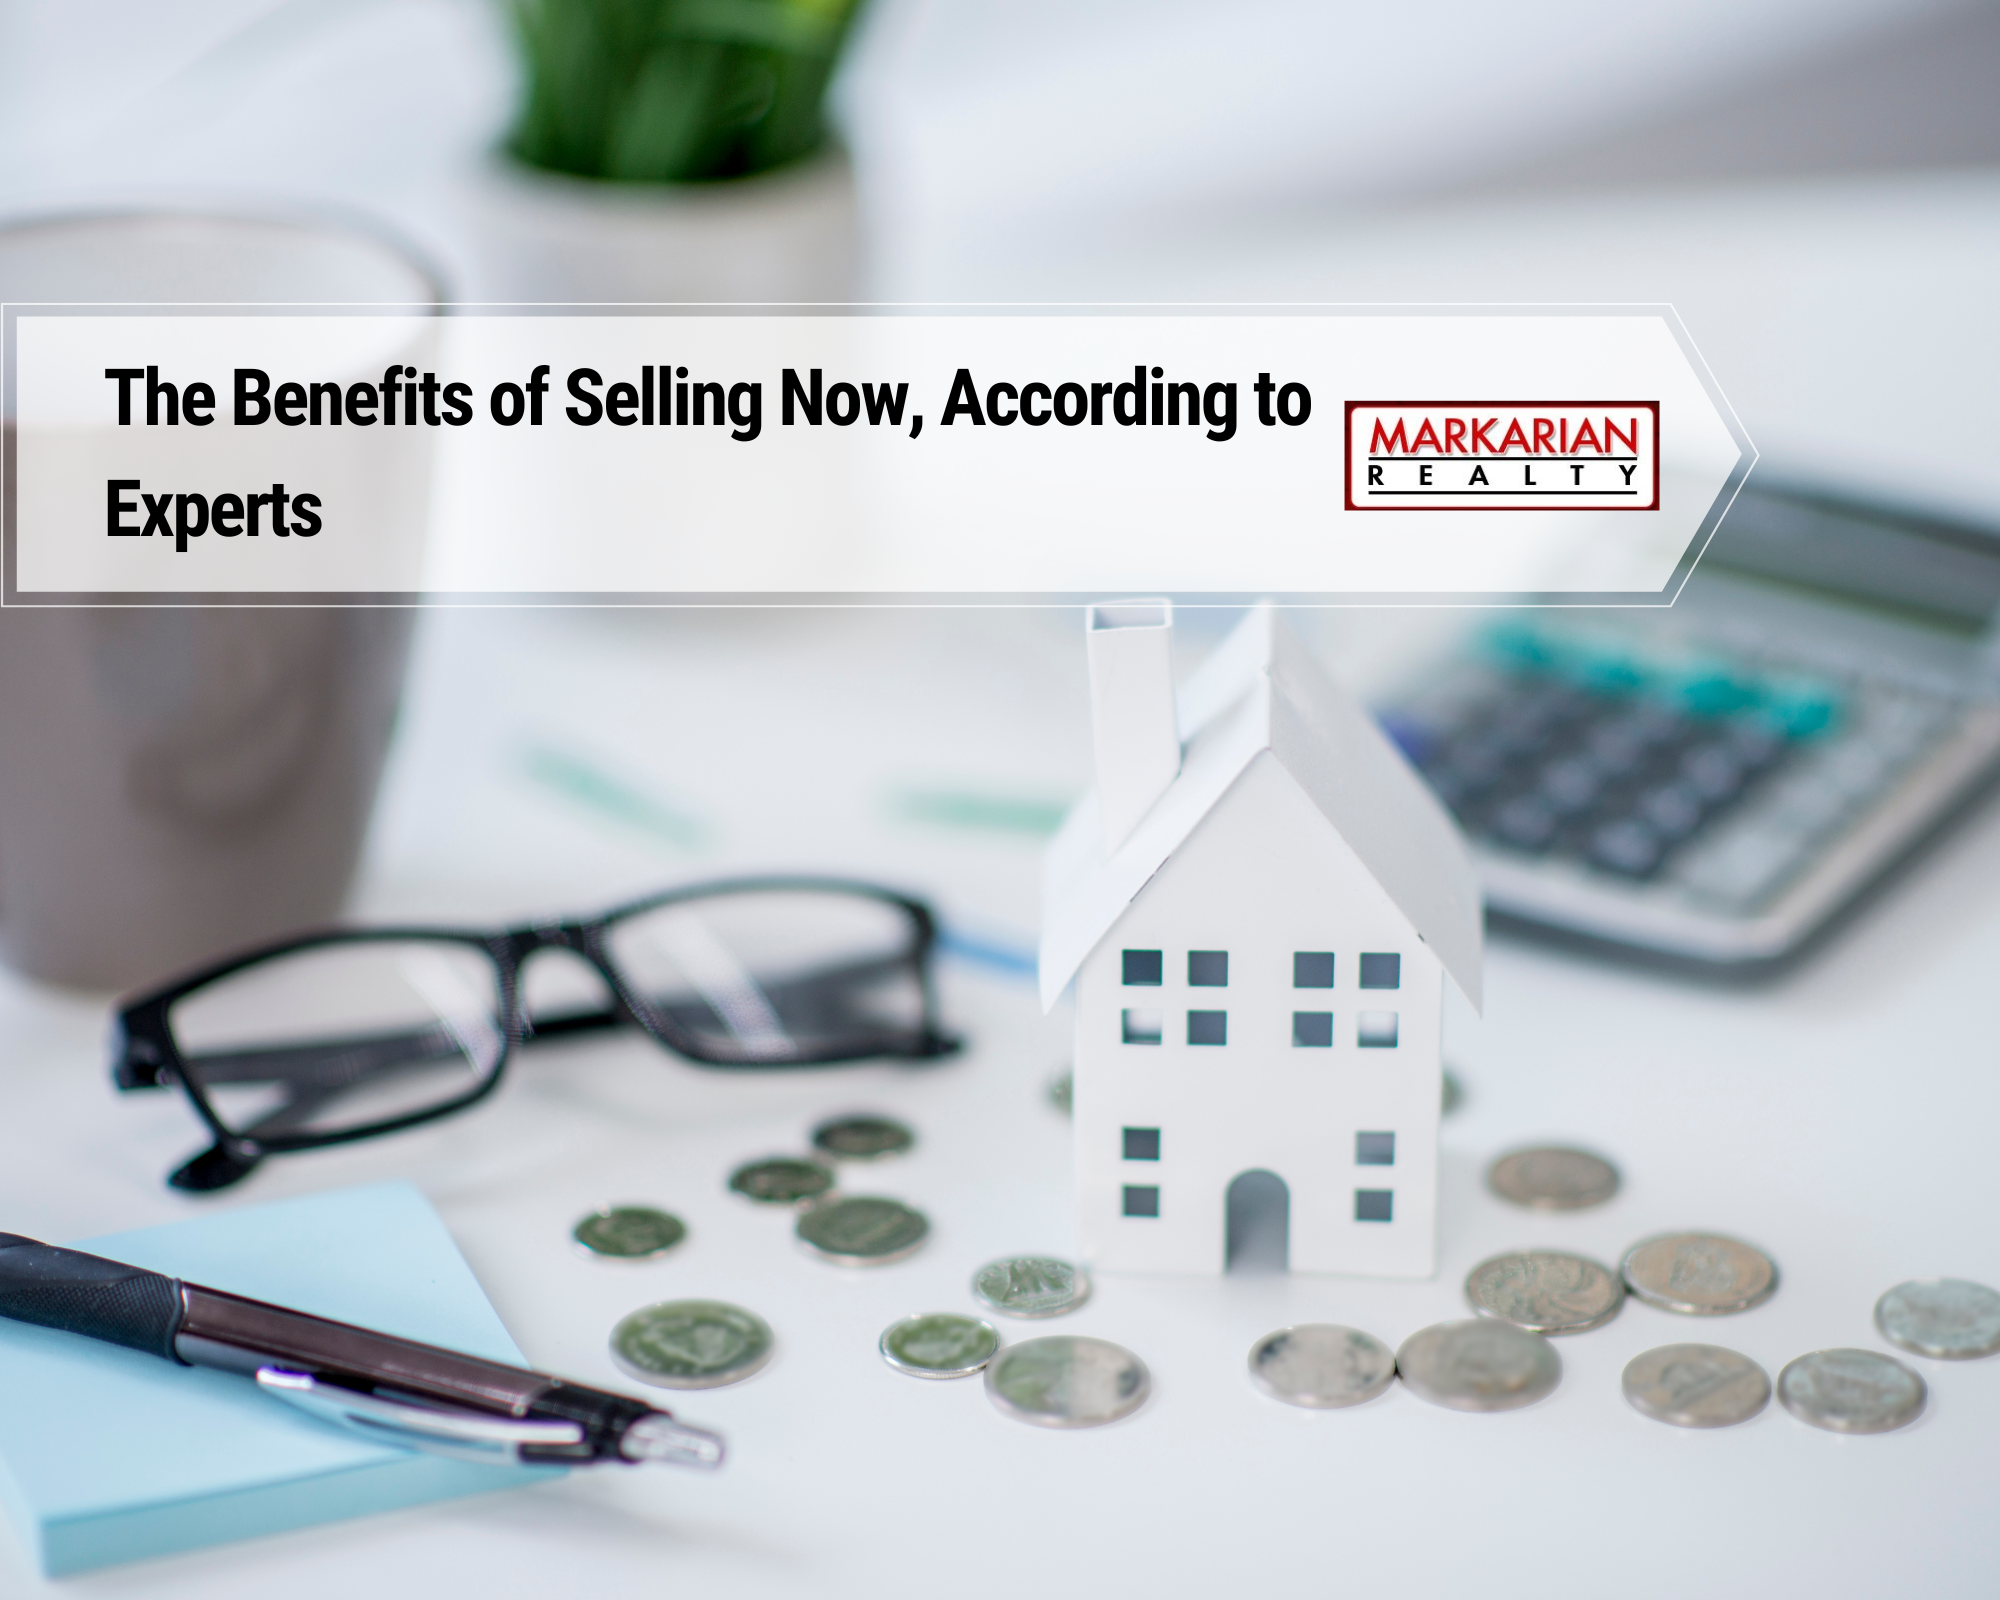 The Benefits of Selling Now, According to Experts